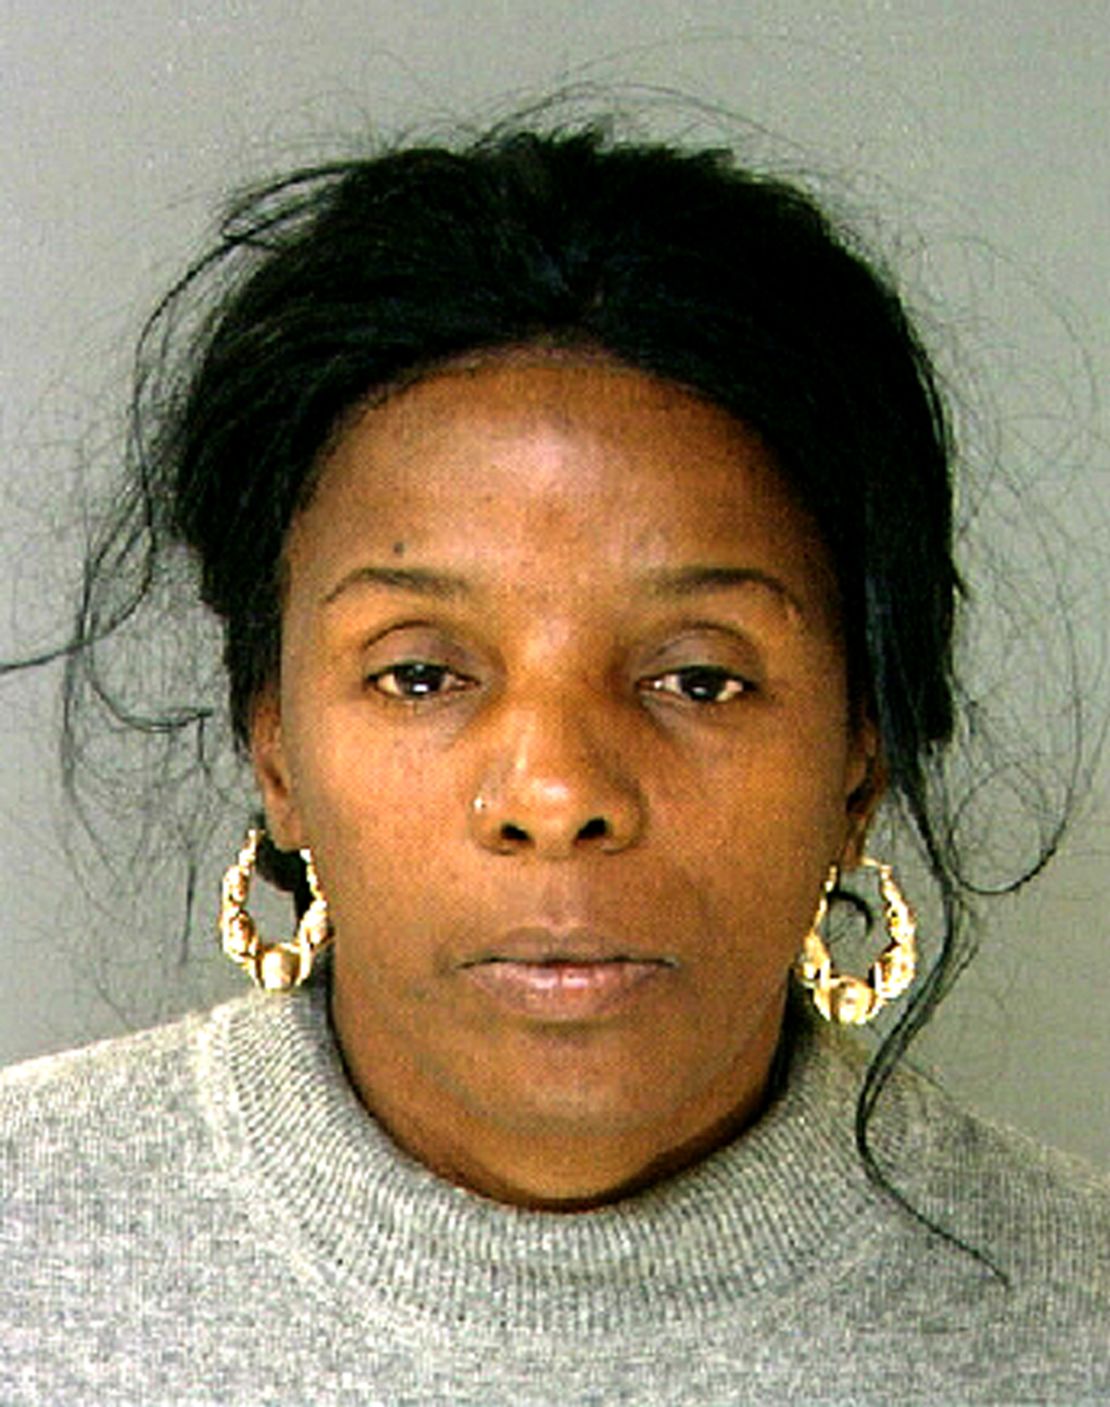 Linda Ann Weston, 52, was described by police as the ringleader of an alleged fraud and abuse scheme.